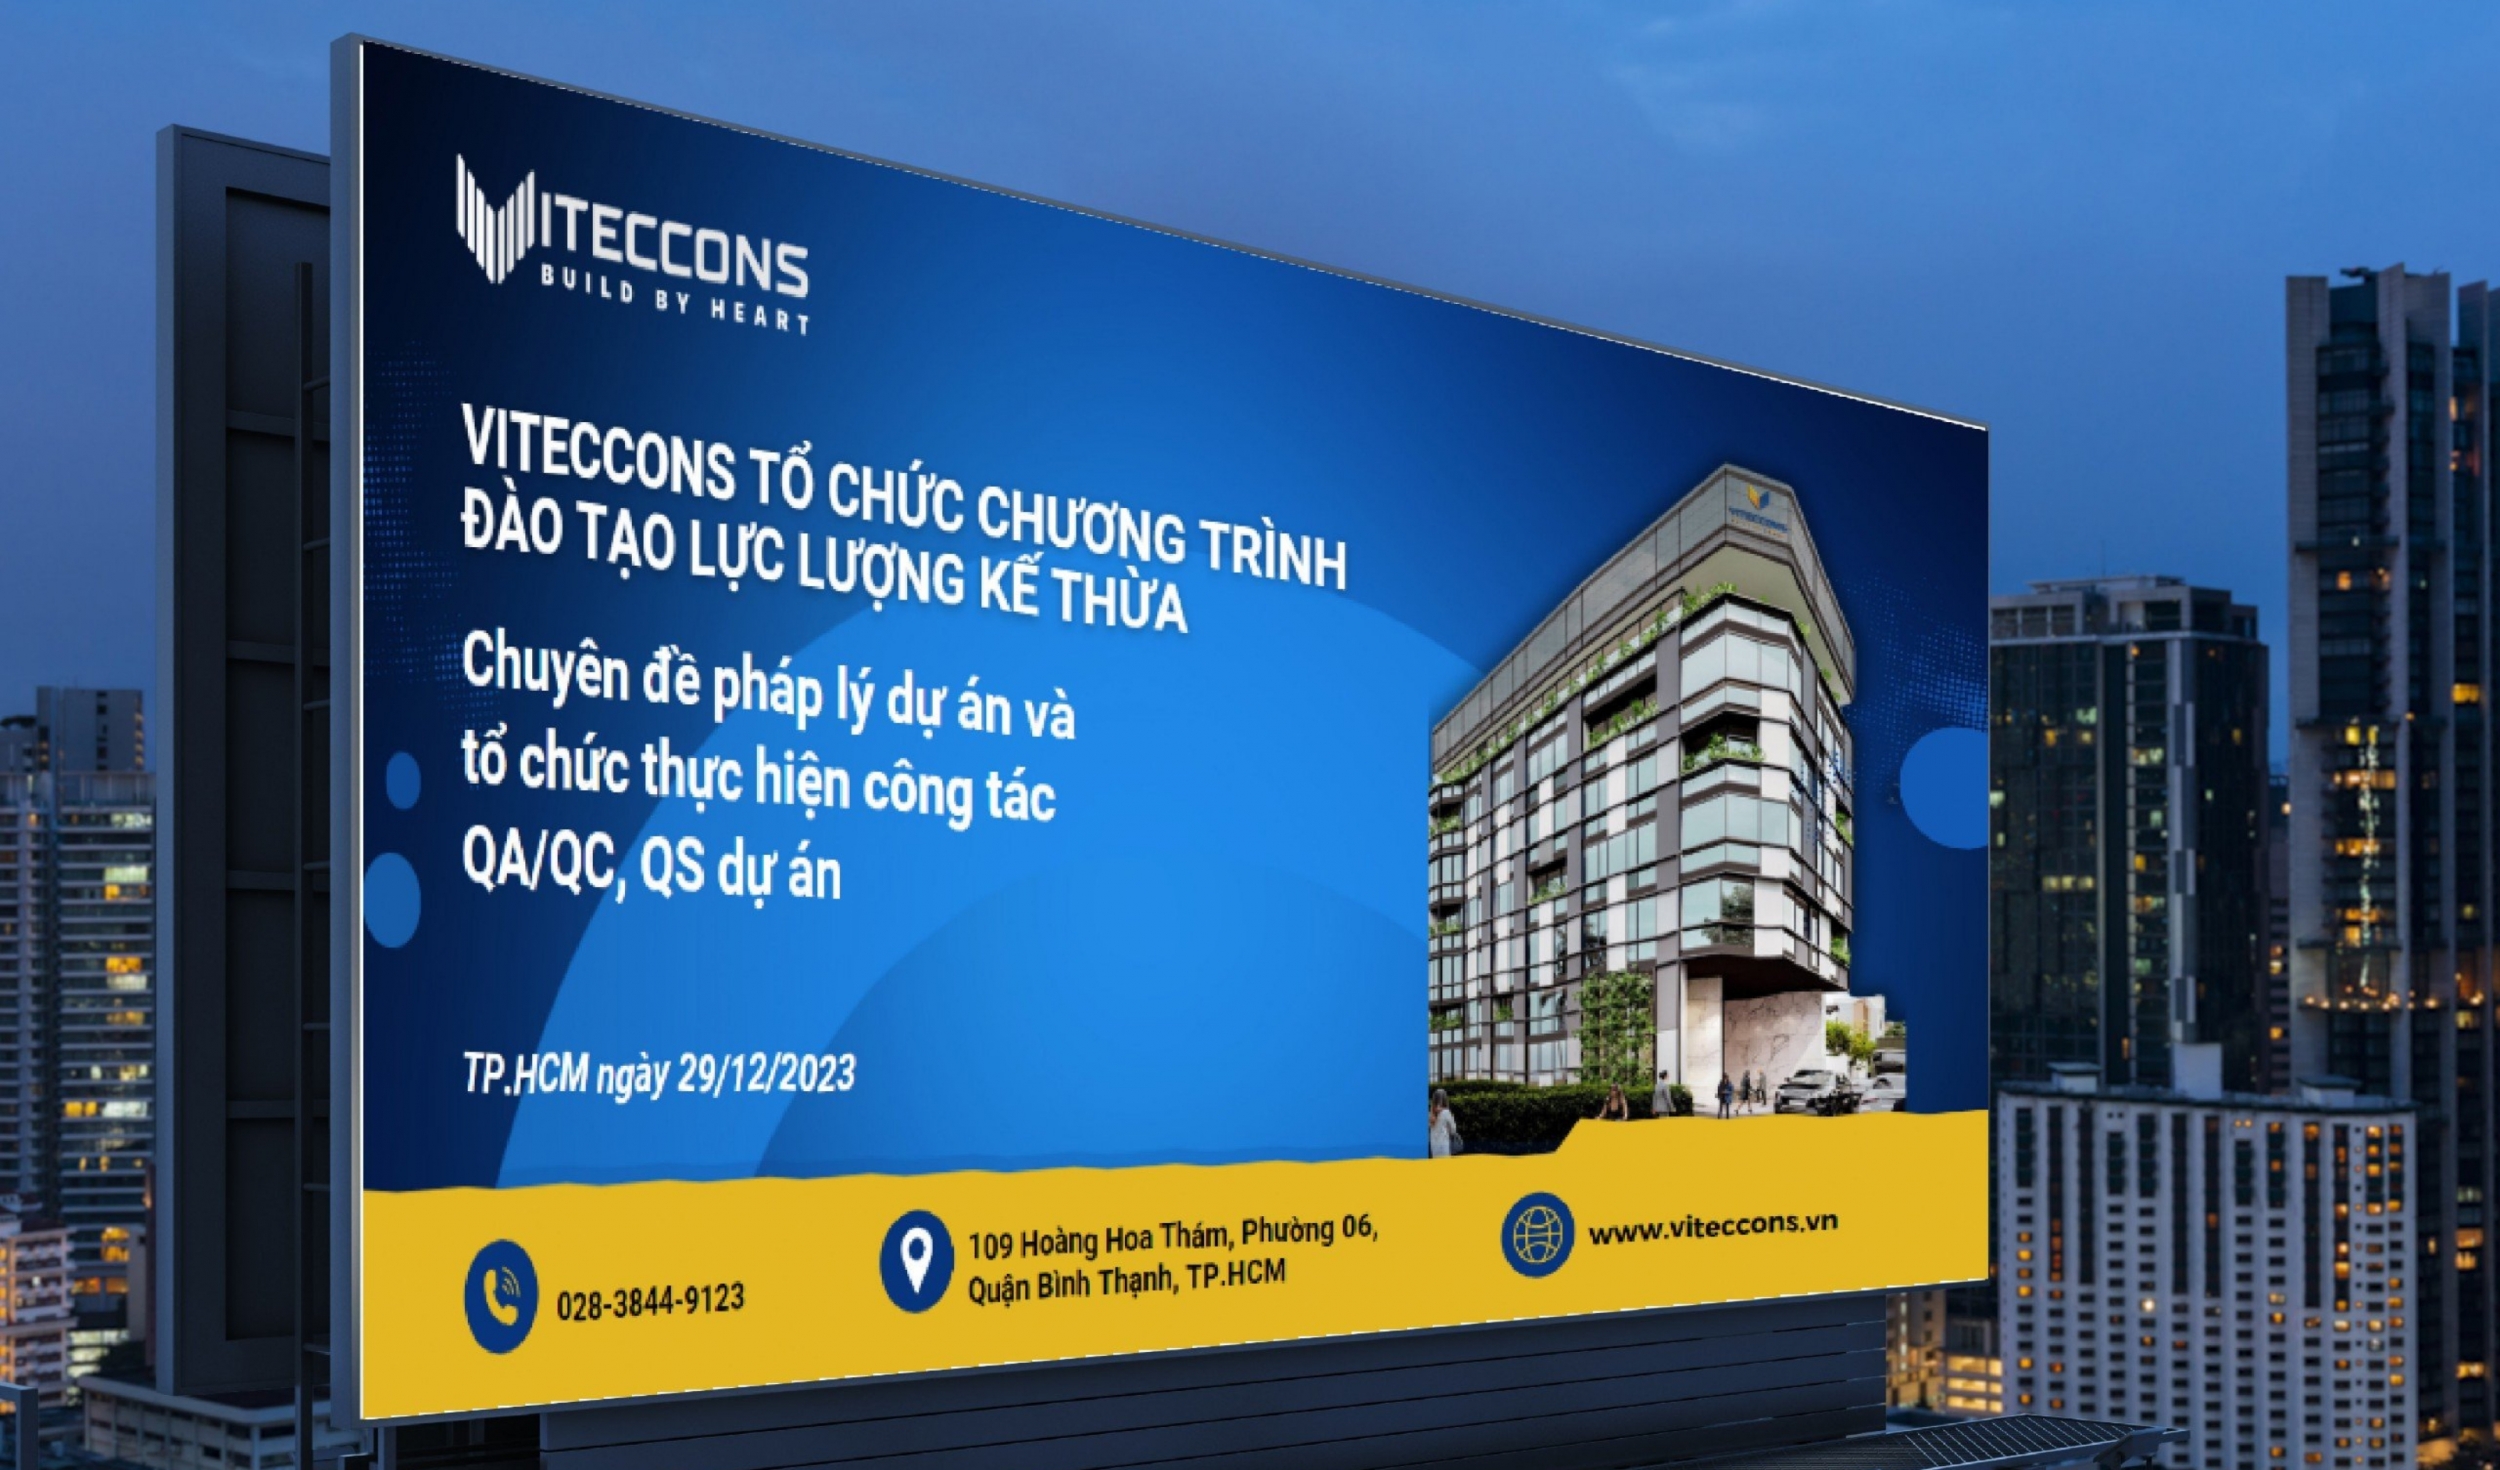 VITECCONS PROVIDES TRAINING ON PROJECT LEGAL MATTERS, PROJECT FINANCE, AND QUALITY ASSURANCE/QUALITY CONTROL (QA/QC), QUANTITY SURVEYING (QS) ON CONSTRUCTION SITES.